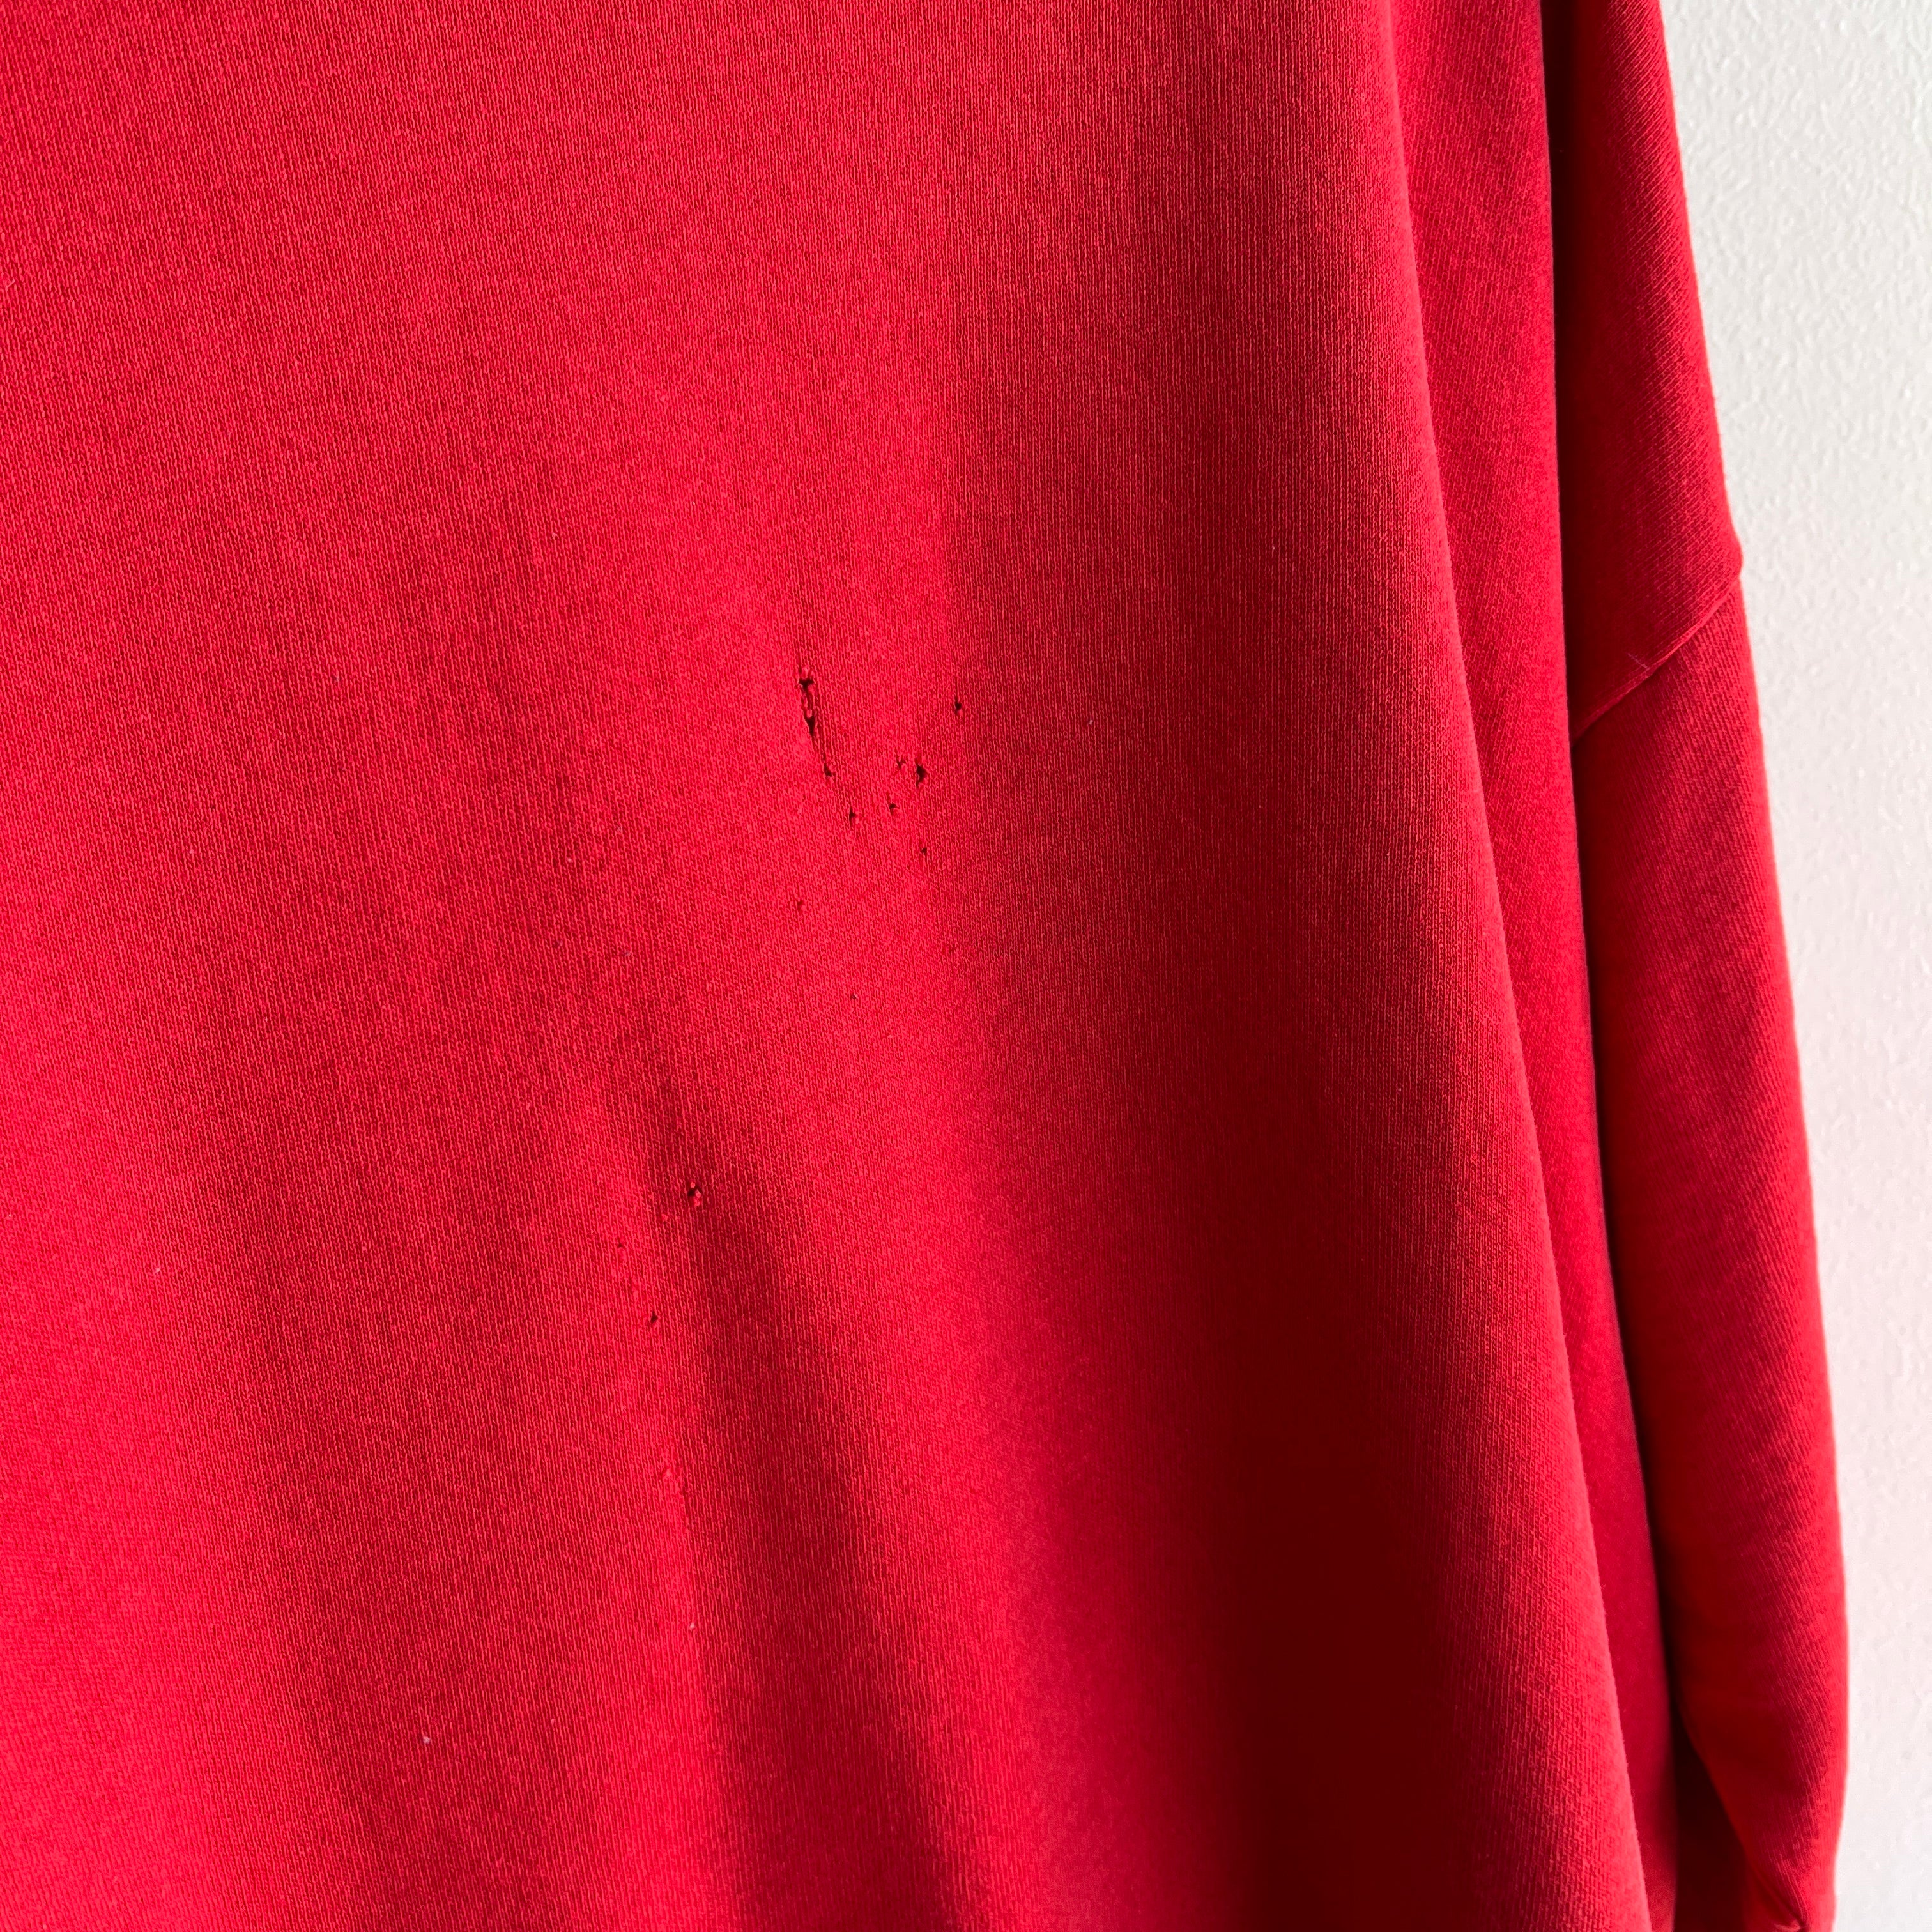 1980s Thinning Worn Out Beat Up Blank Red Sweatshirt by Jerzees - Labeled 3X